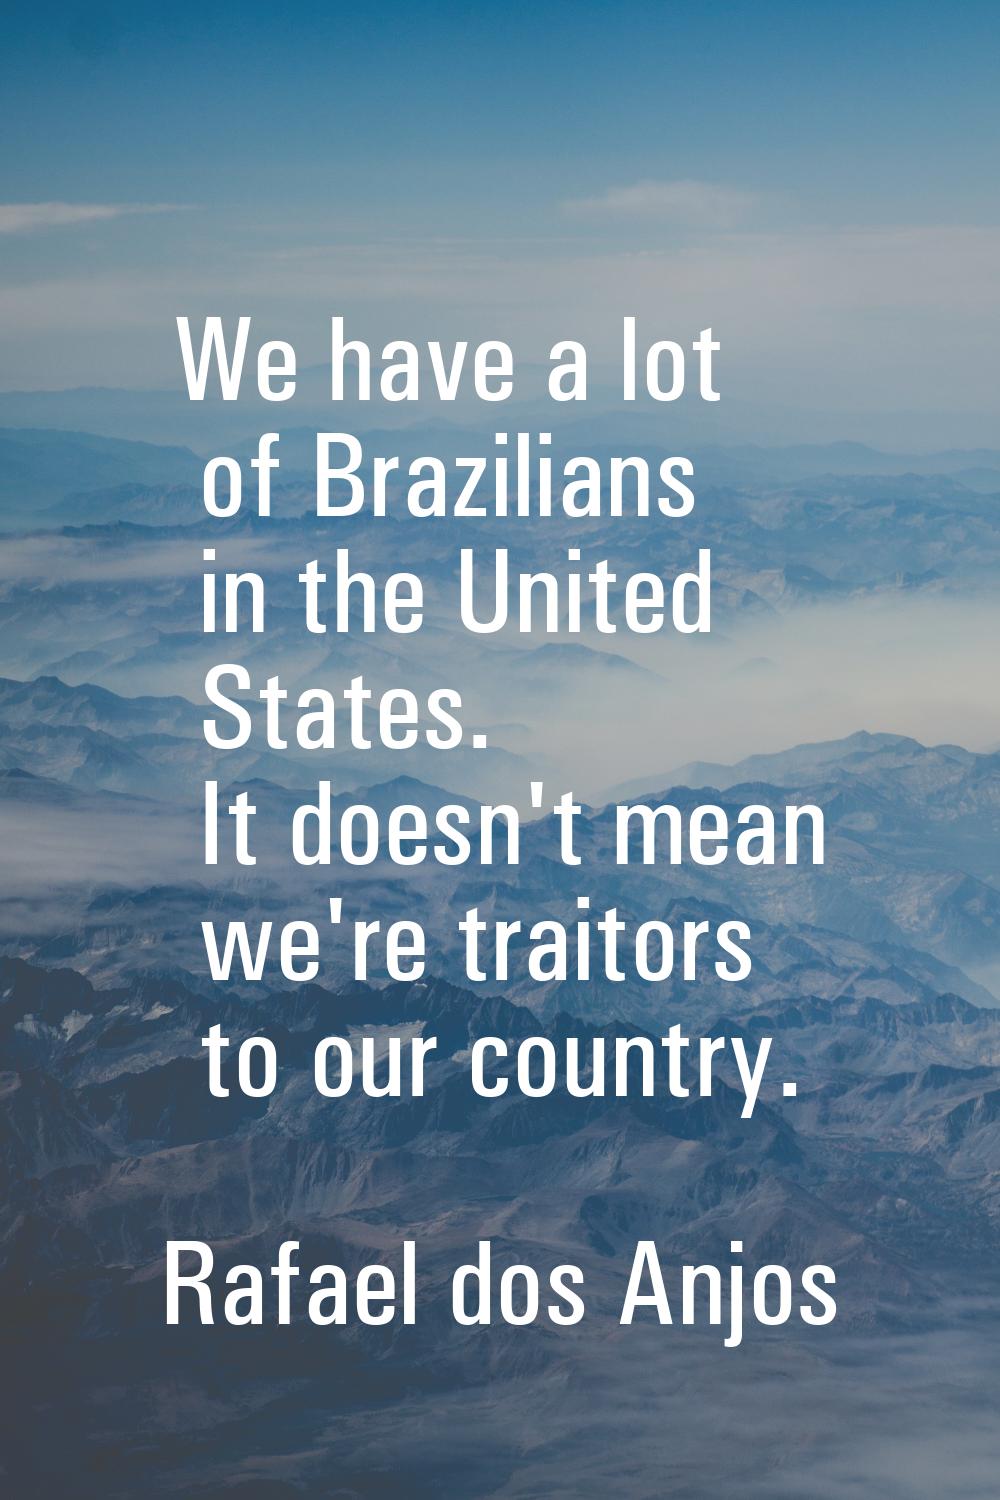 We have a lot of Brazilians in the United States. It doesn't mean we're traitors to our country.